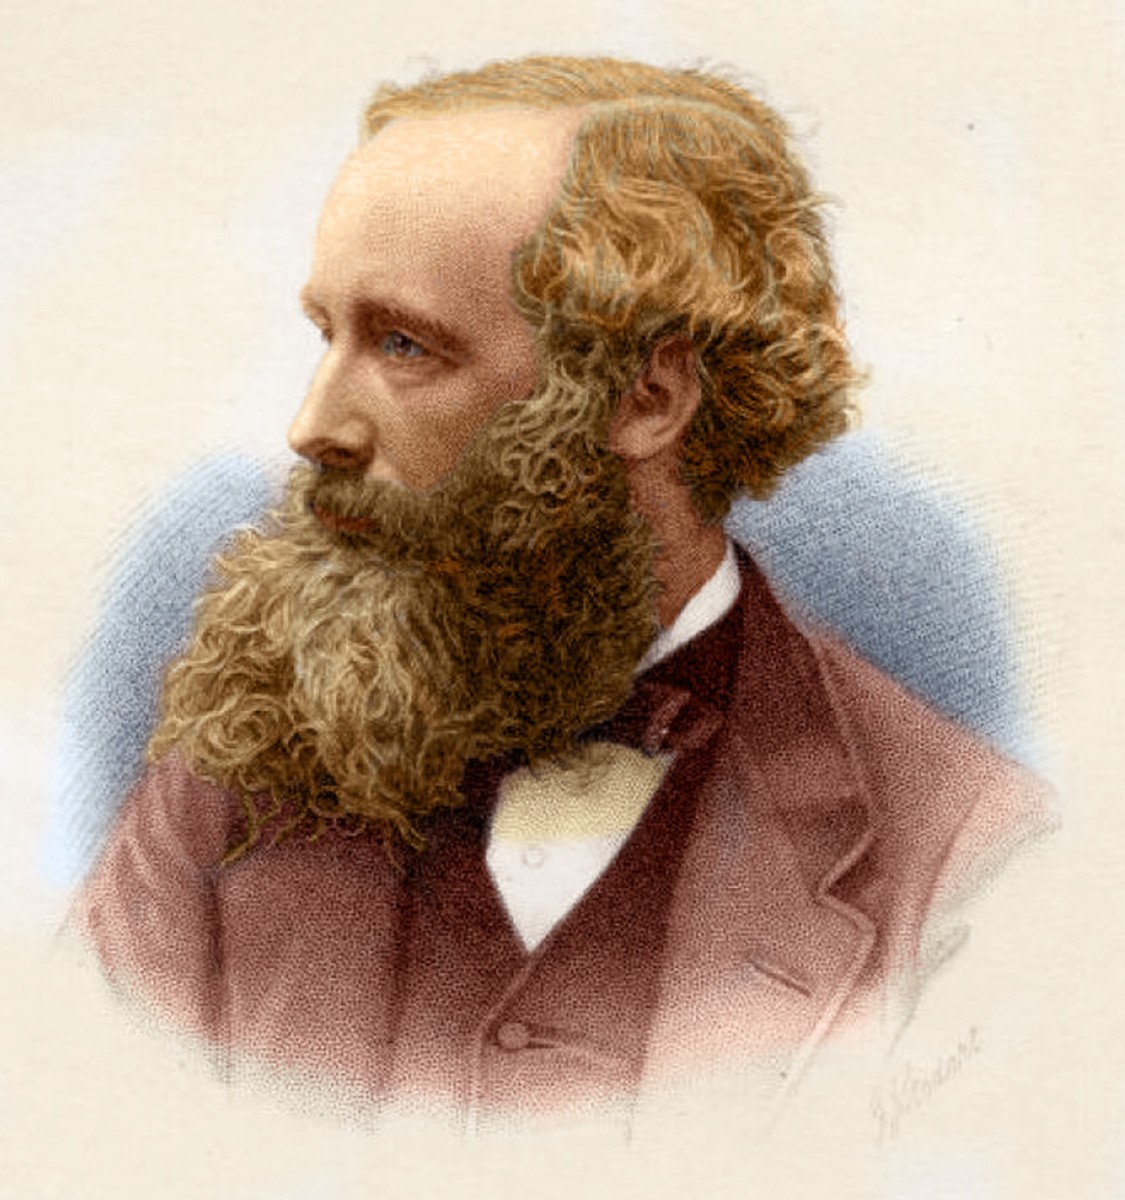 The Scientific Contributions of James Clerk Maxwell